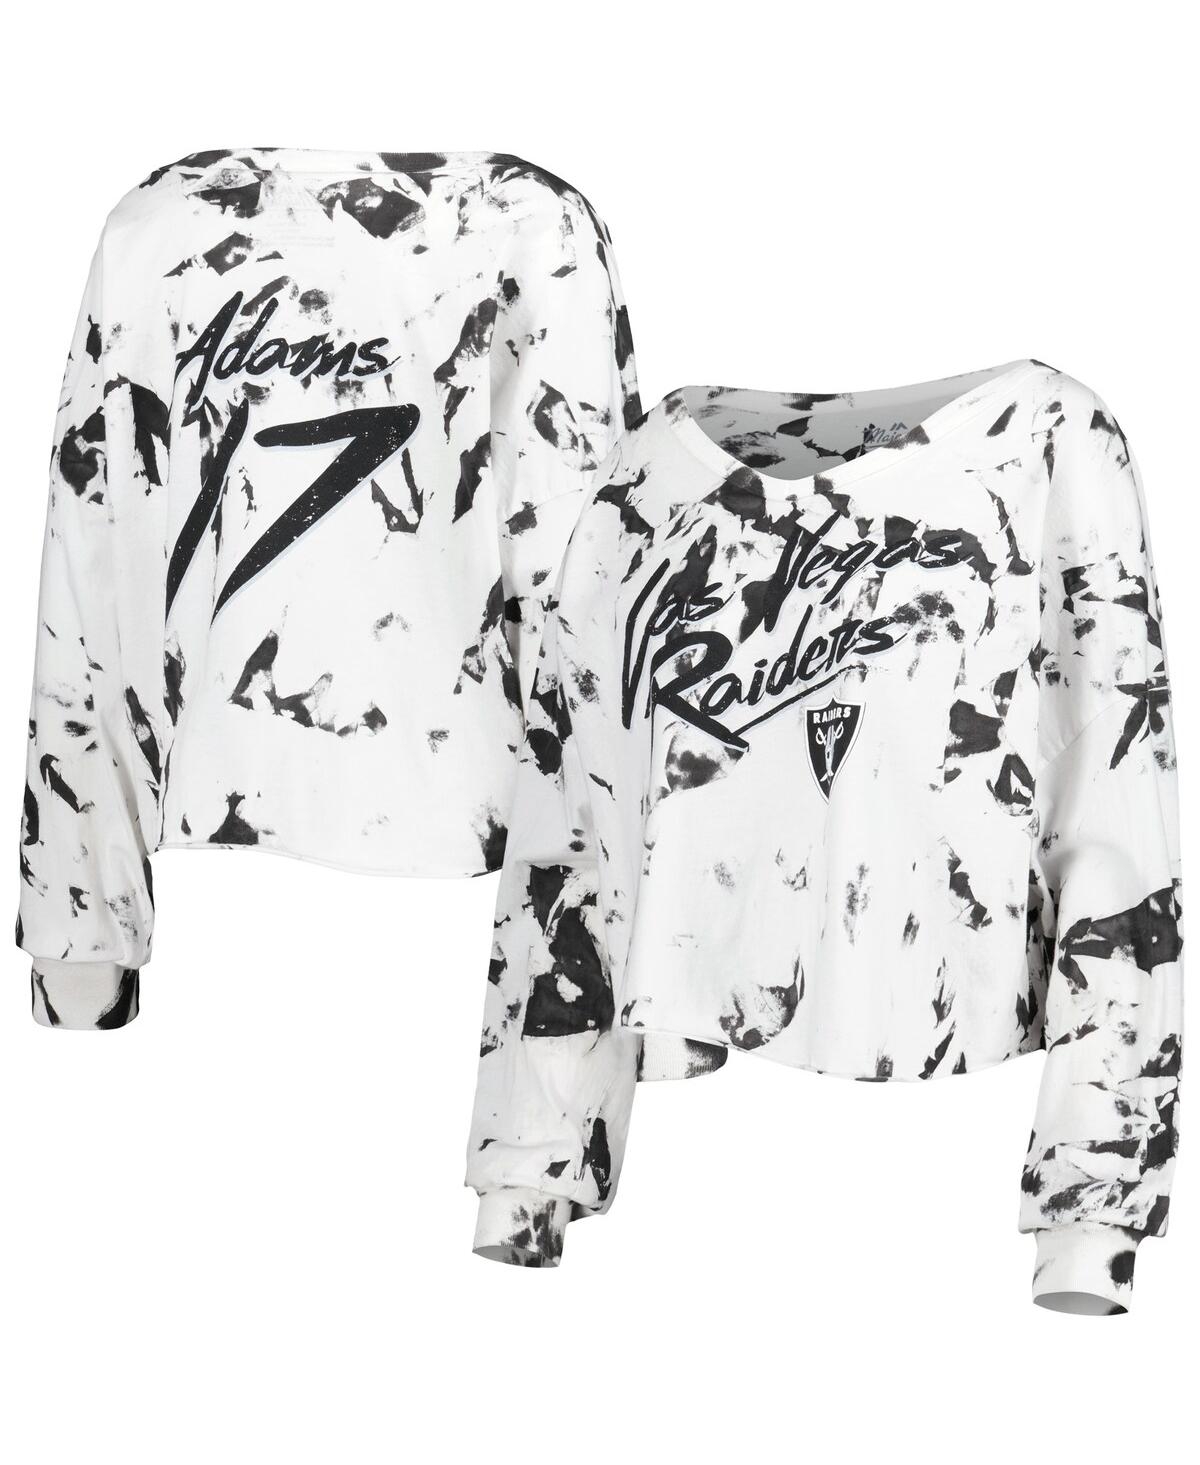 Women's Majestic Threads Davante Adams White Las Vegas Raiders Off-Shoulder Tie-Dye Name and Number Cropped Long Sleeve V-Neck T-shirt - White